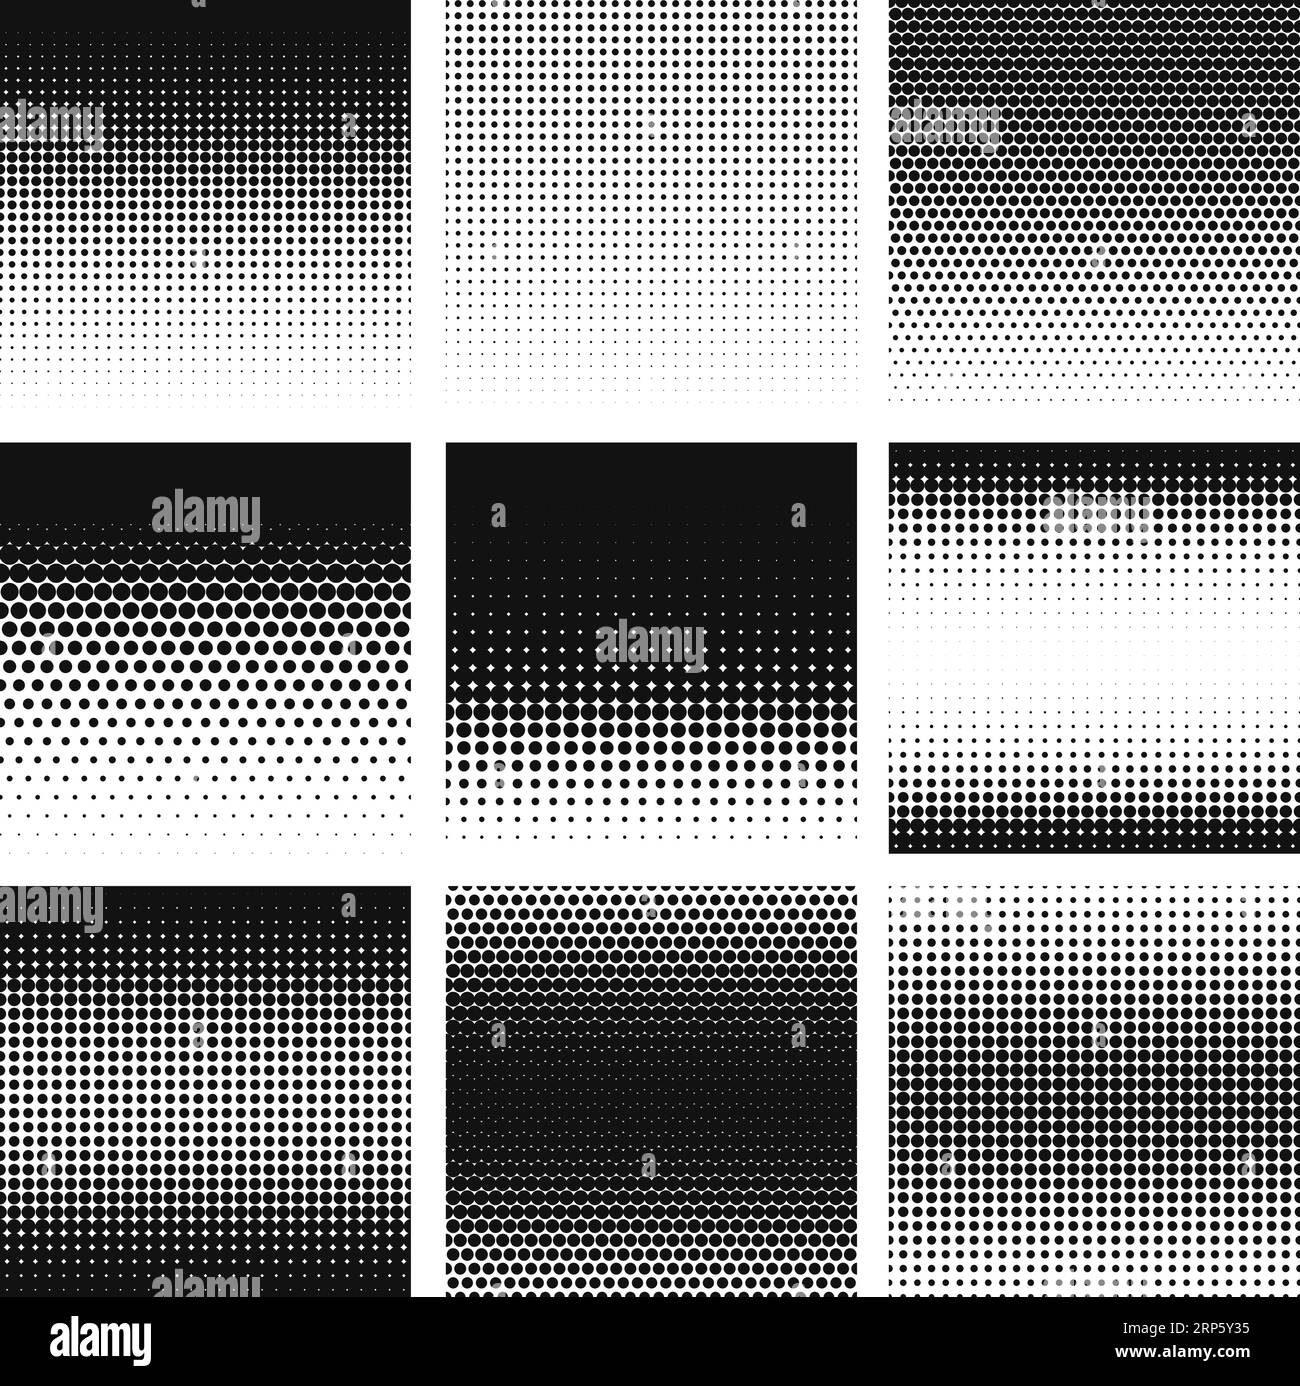 Halftone. Gradient halftone dots graphic, digital technology pattern. Grayscale perforated monochrome honeycomb geometric texture template vector set Stock Vector